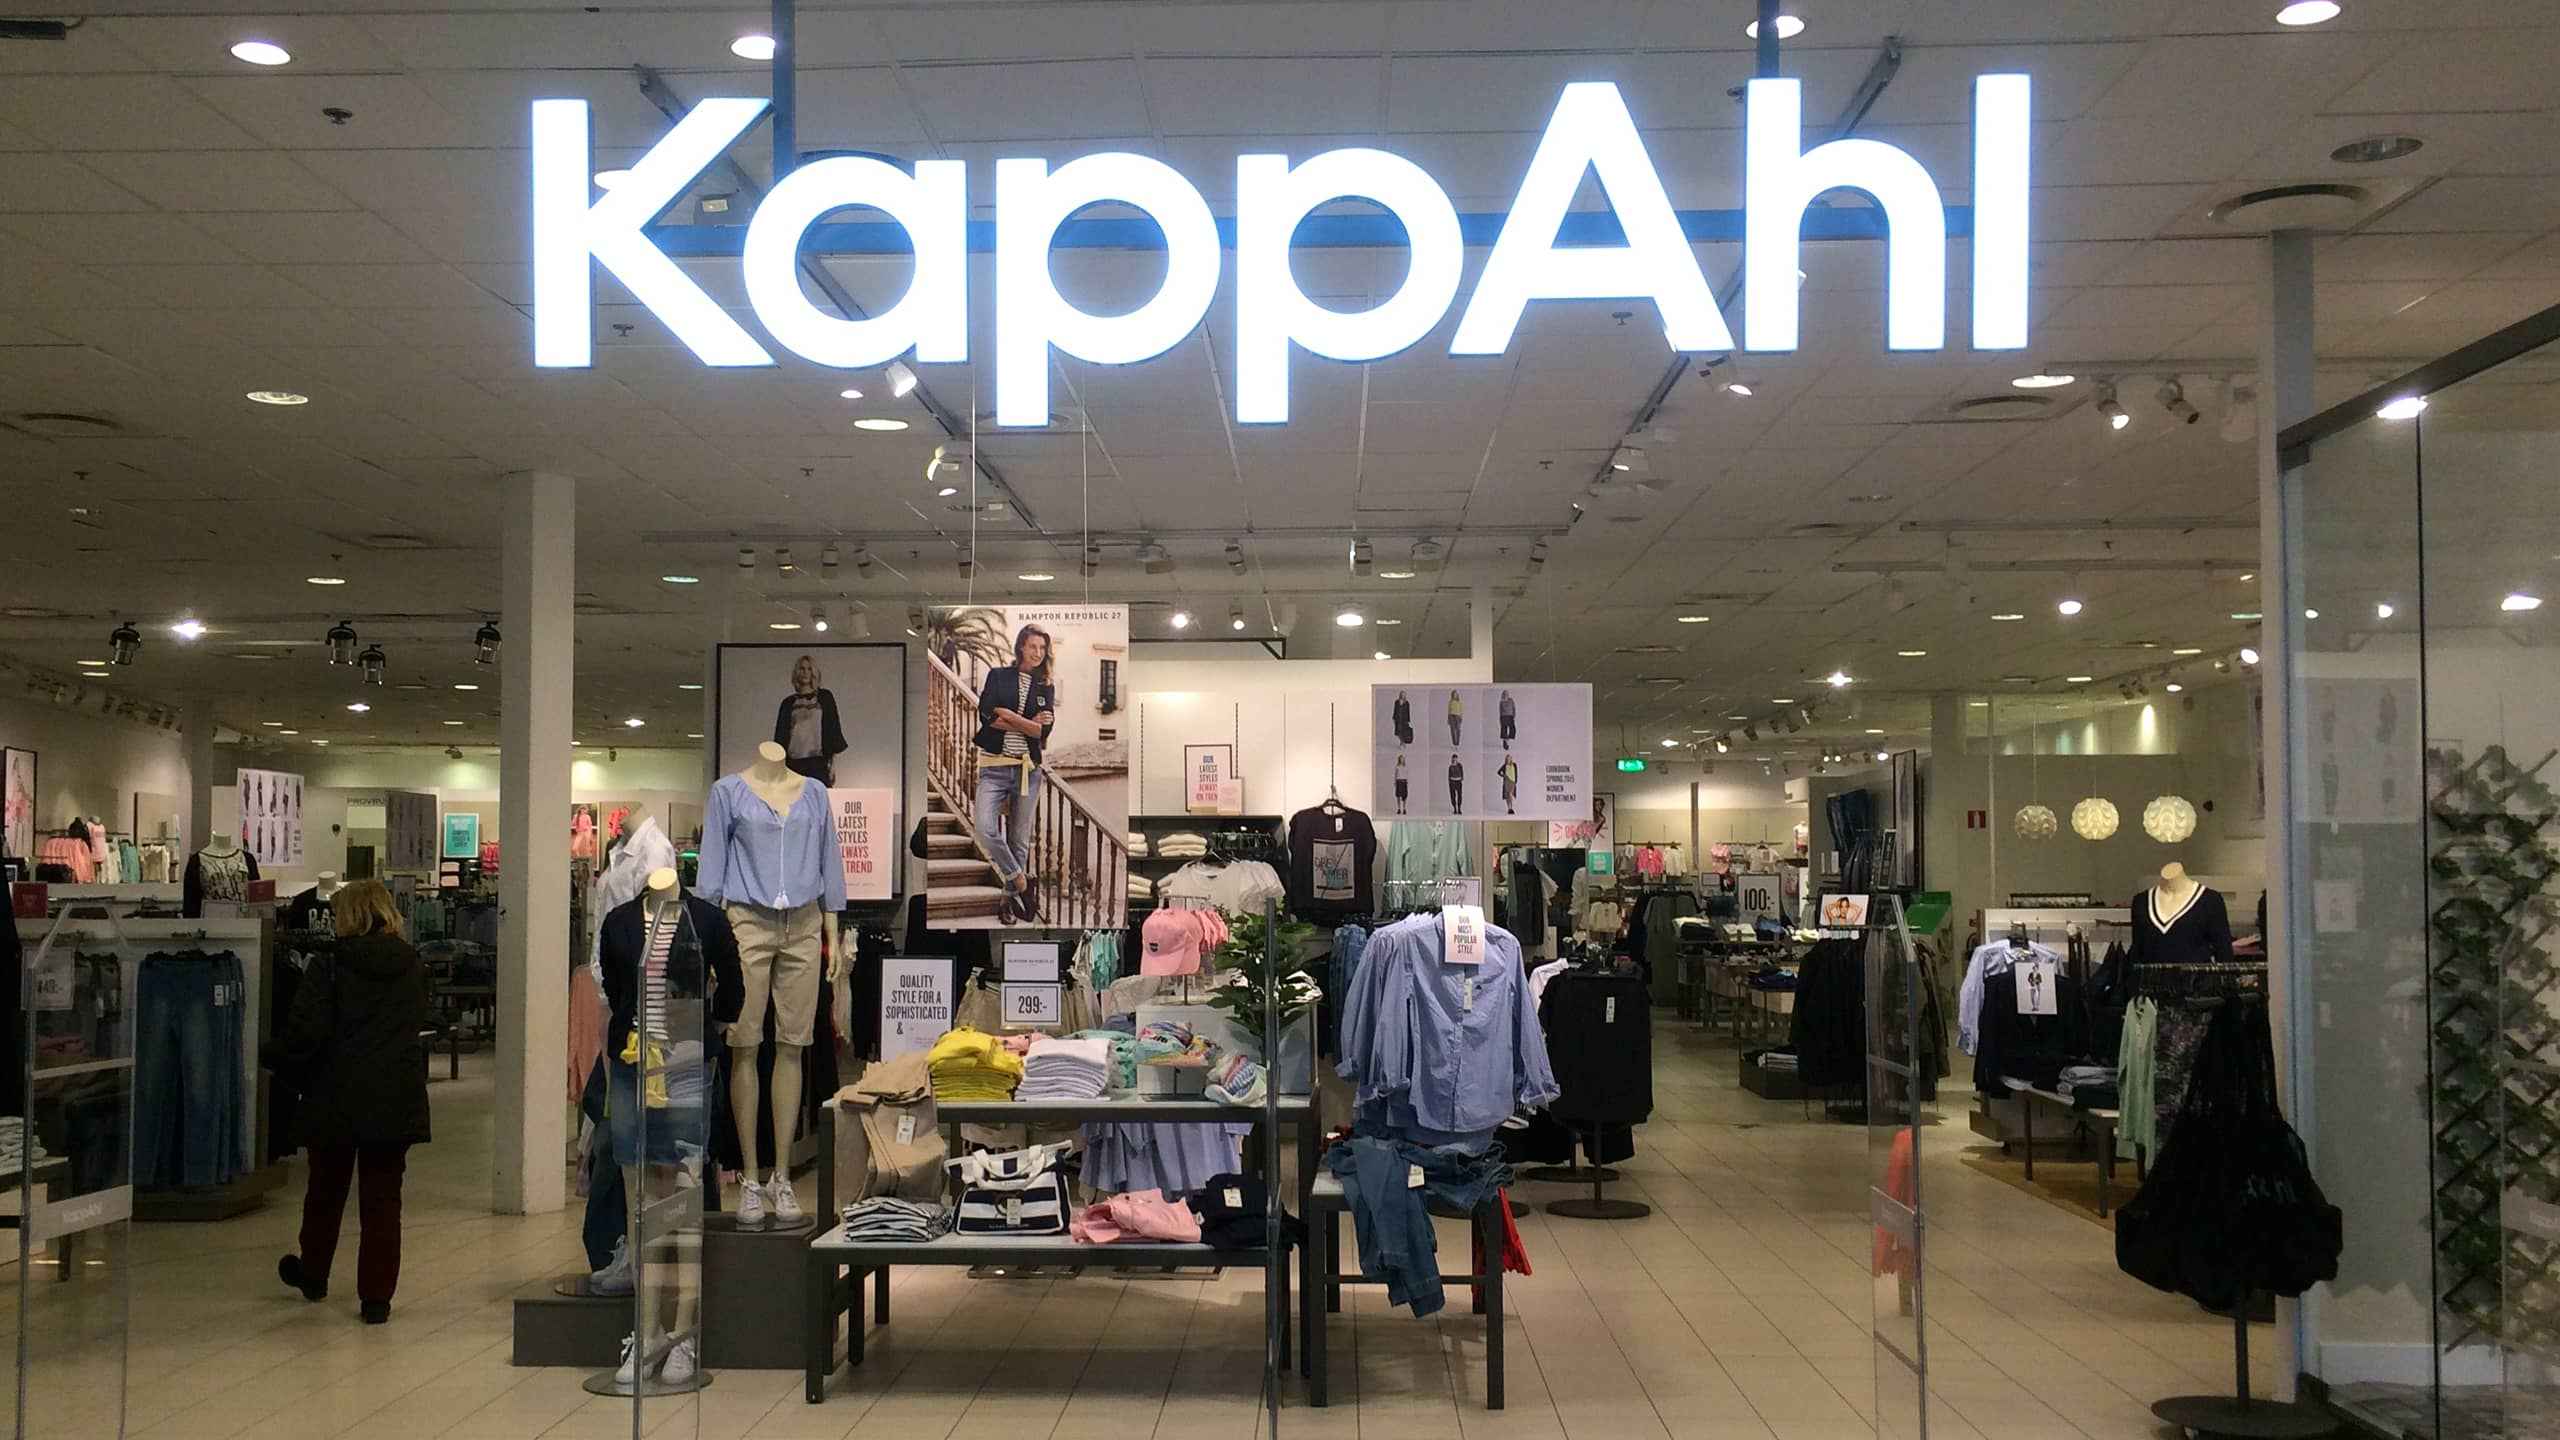 KappAhl sales up by 2.1% in third quarter of fiscal 2017-18